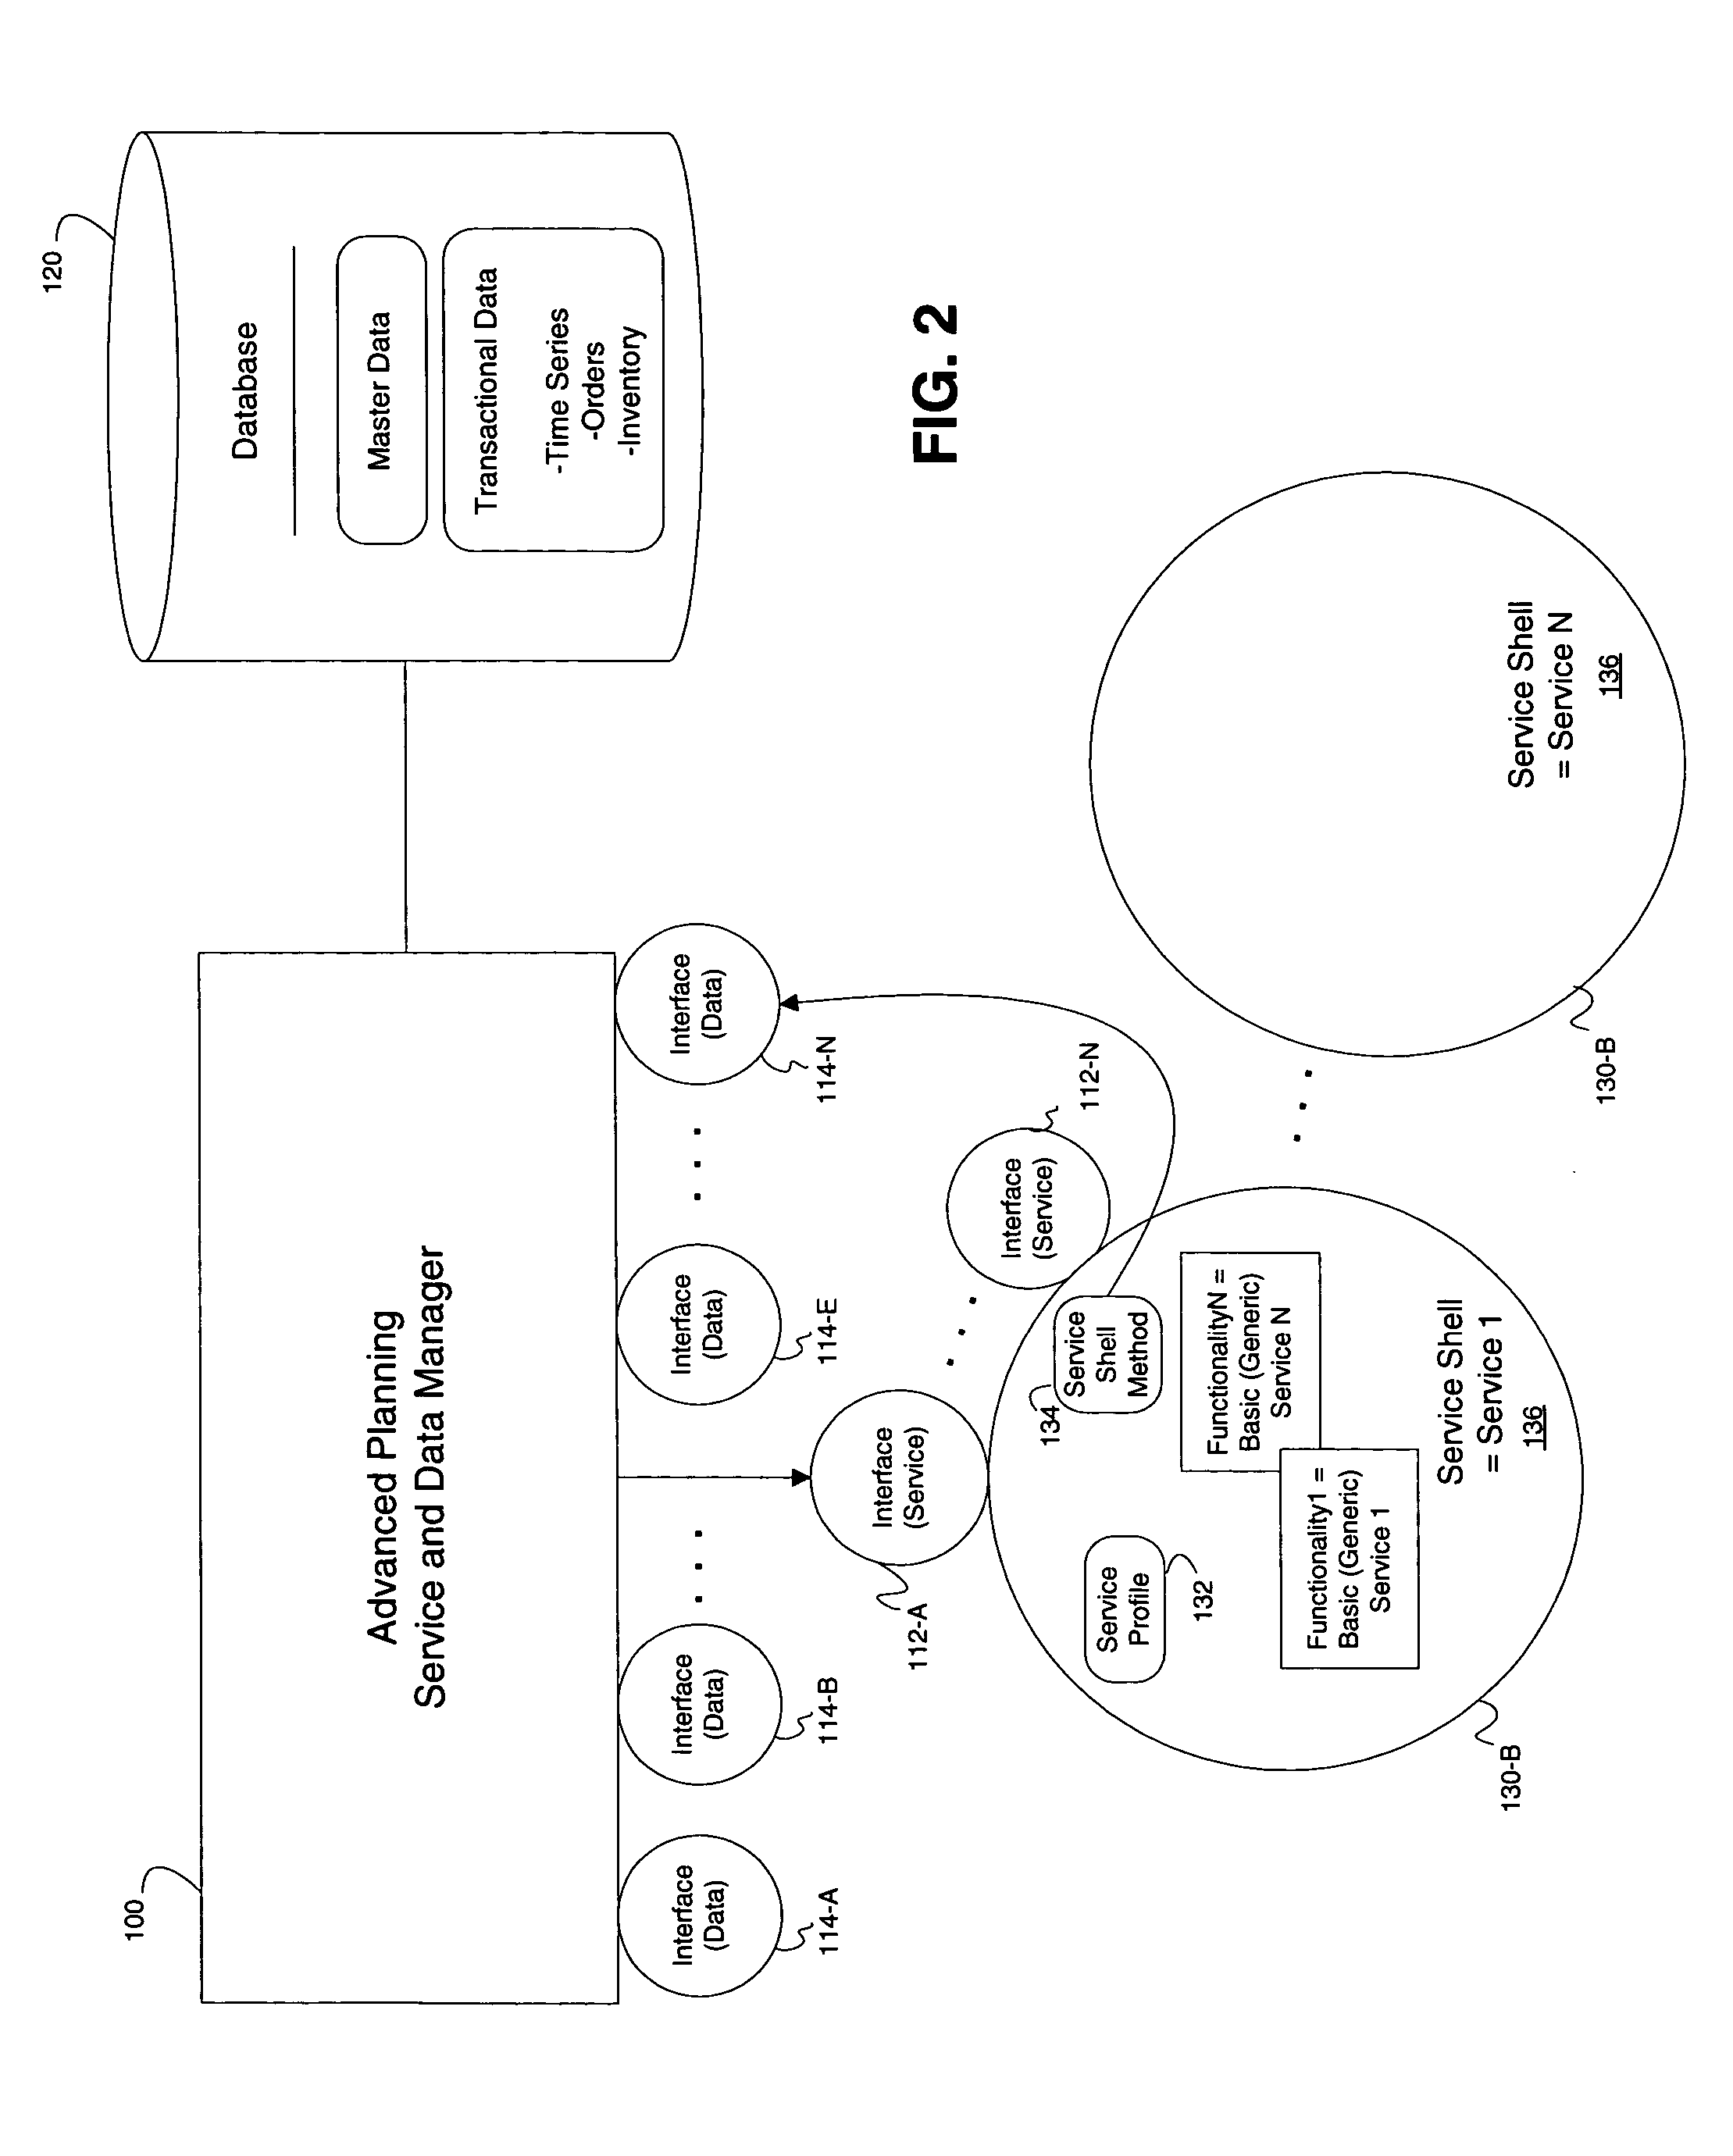 Systems and methods for managing data in an advanced planning environment